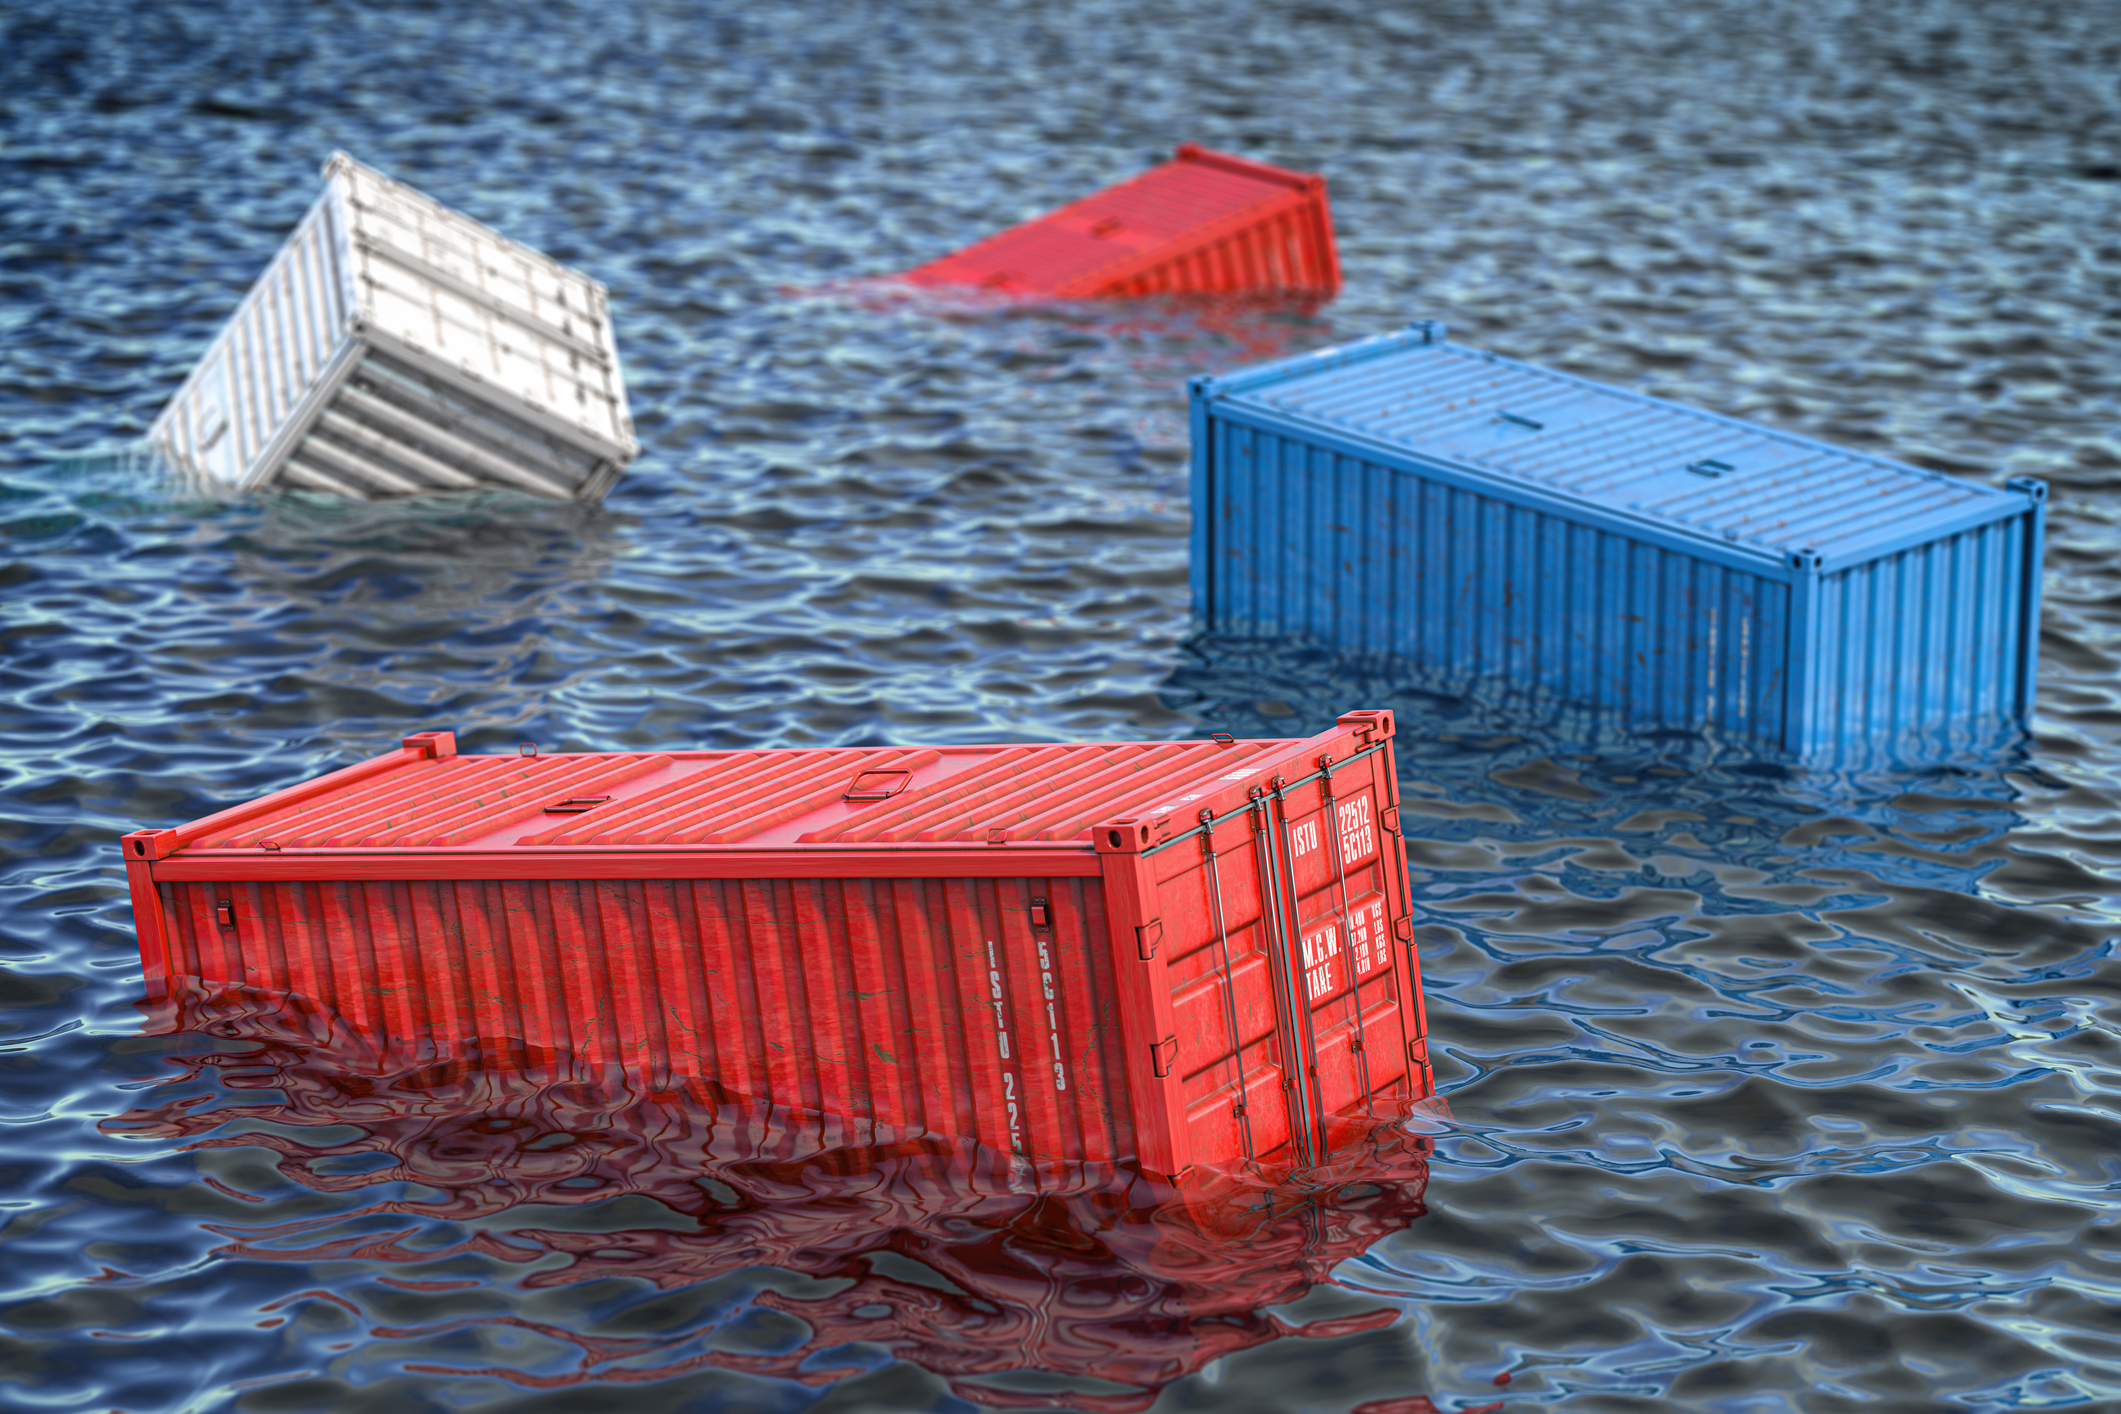 Global Shipping Industry Praises New IMO Regulations on Lost Containers Reporting